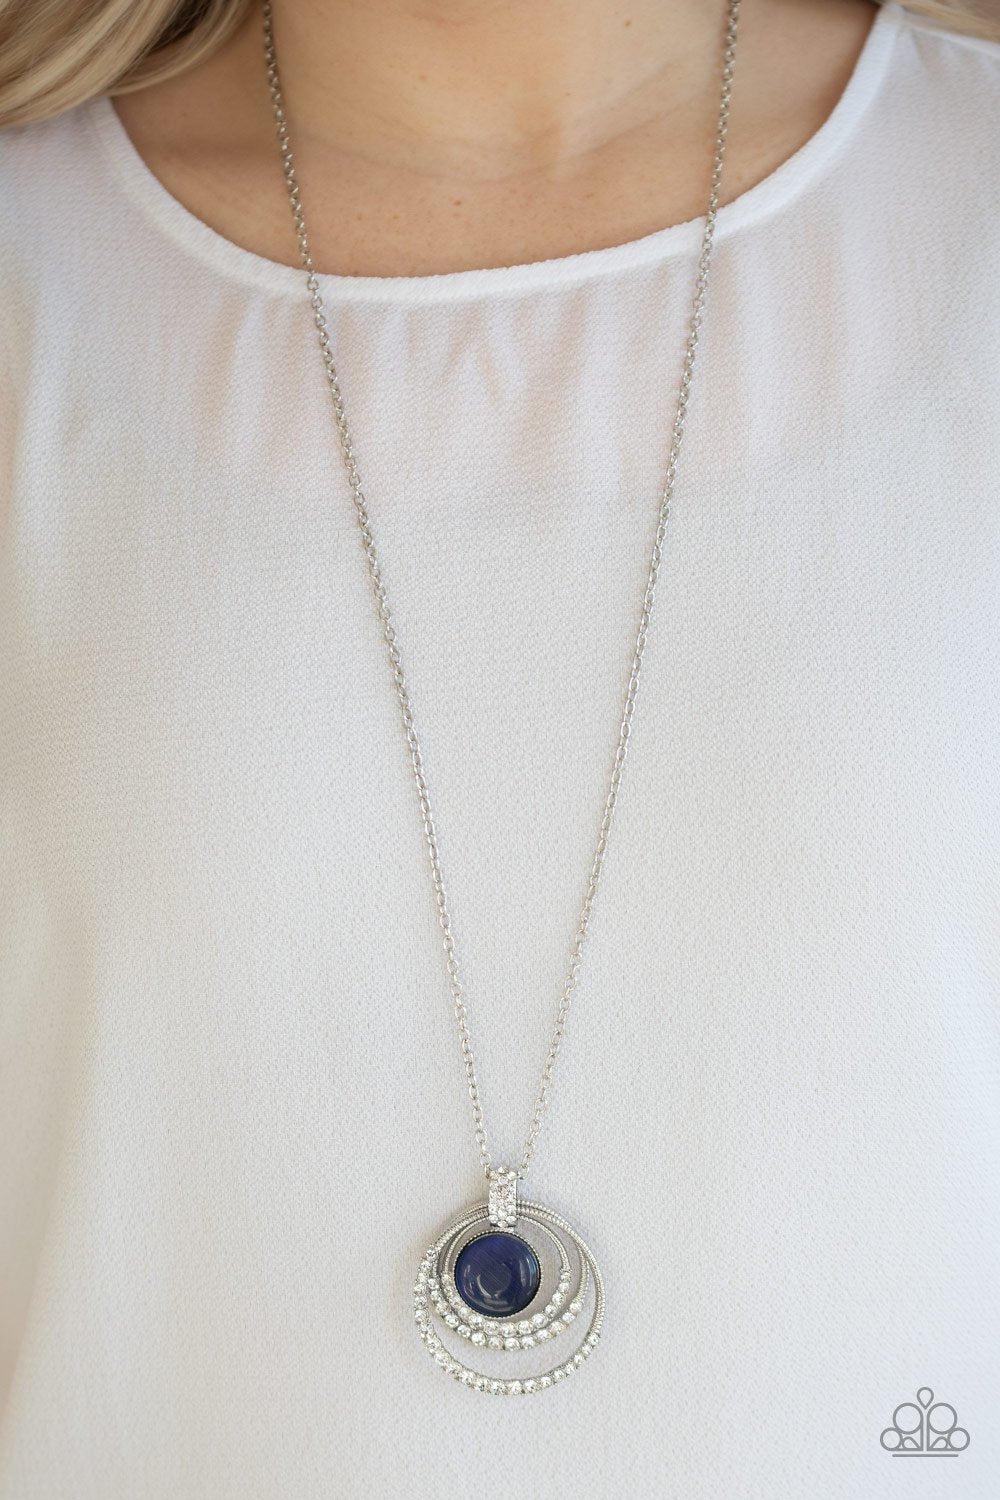 A Diamond A Day Blue Cat's Eye Pendant Necklace - Paparazzi Accessories-CarasShop.com - $5 Jewelry by Cara Jewels